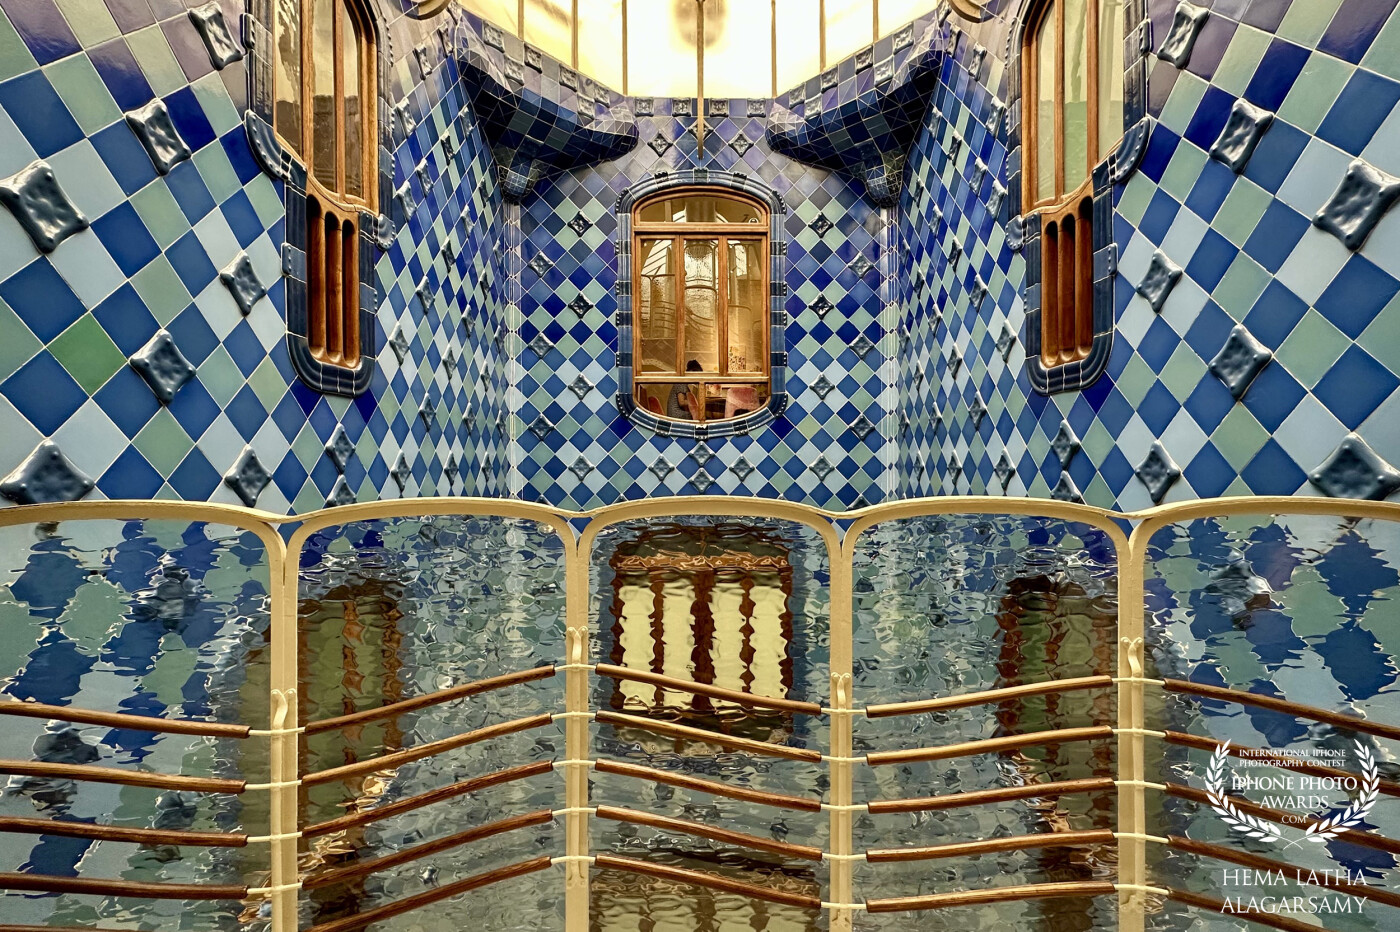 📍Casa Batlló<br />
- Casa Batlló was a family residence and we stepped into the creative brains of Antoni Gaudí. Such a genius architect from the 19th century! We were mind blown.